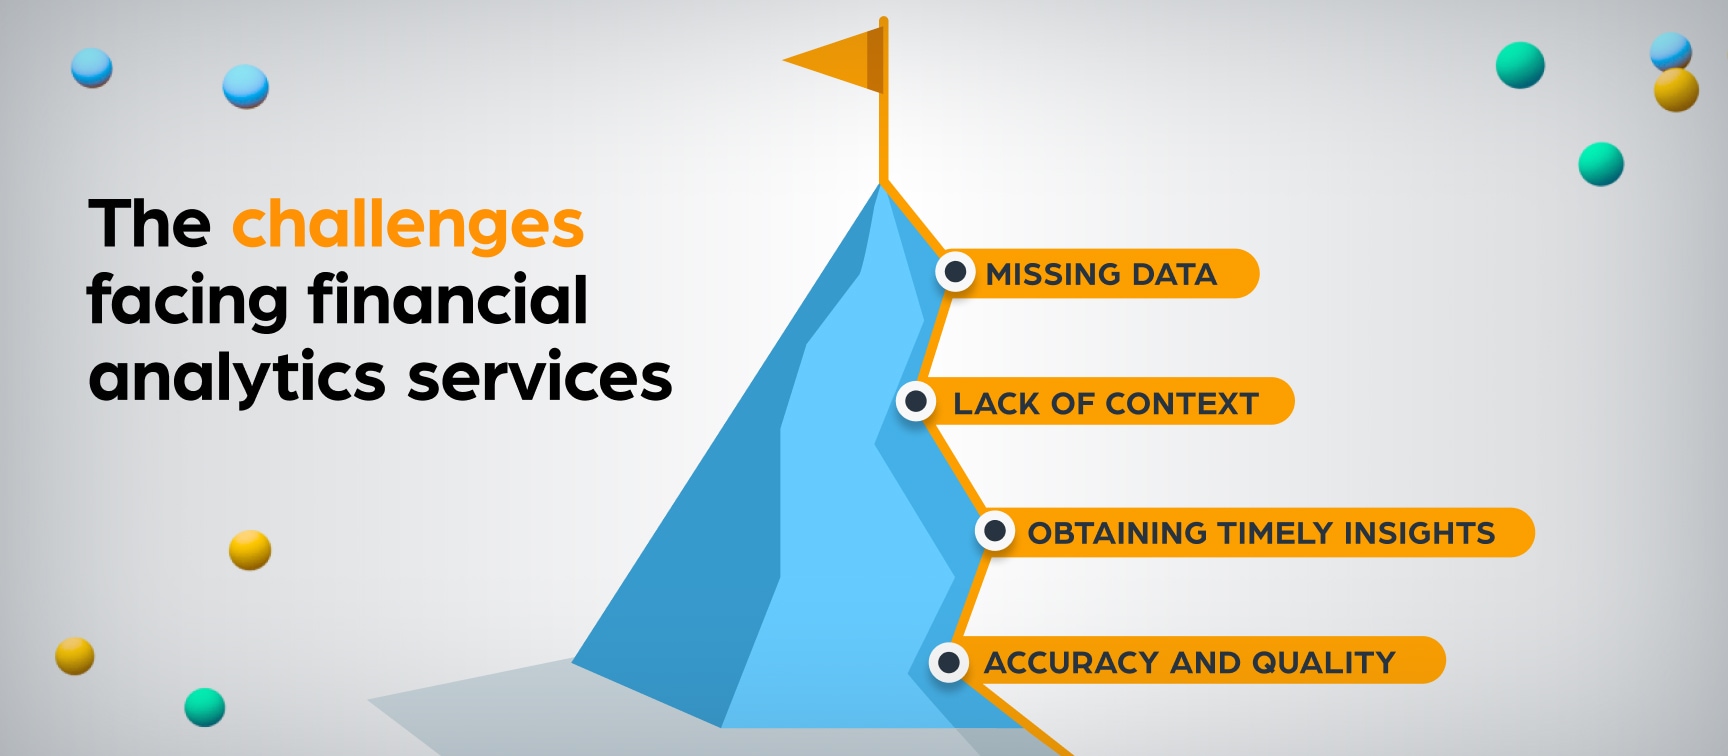 The challenges facing financial analytics services